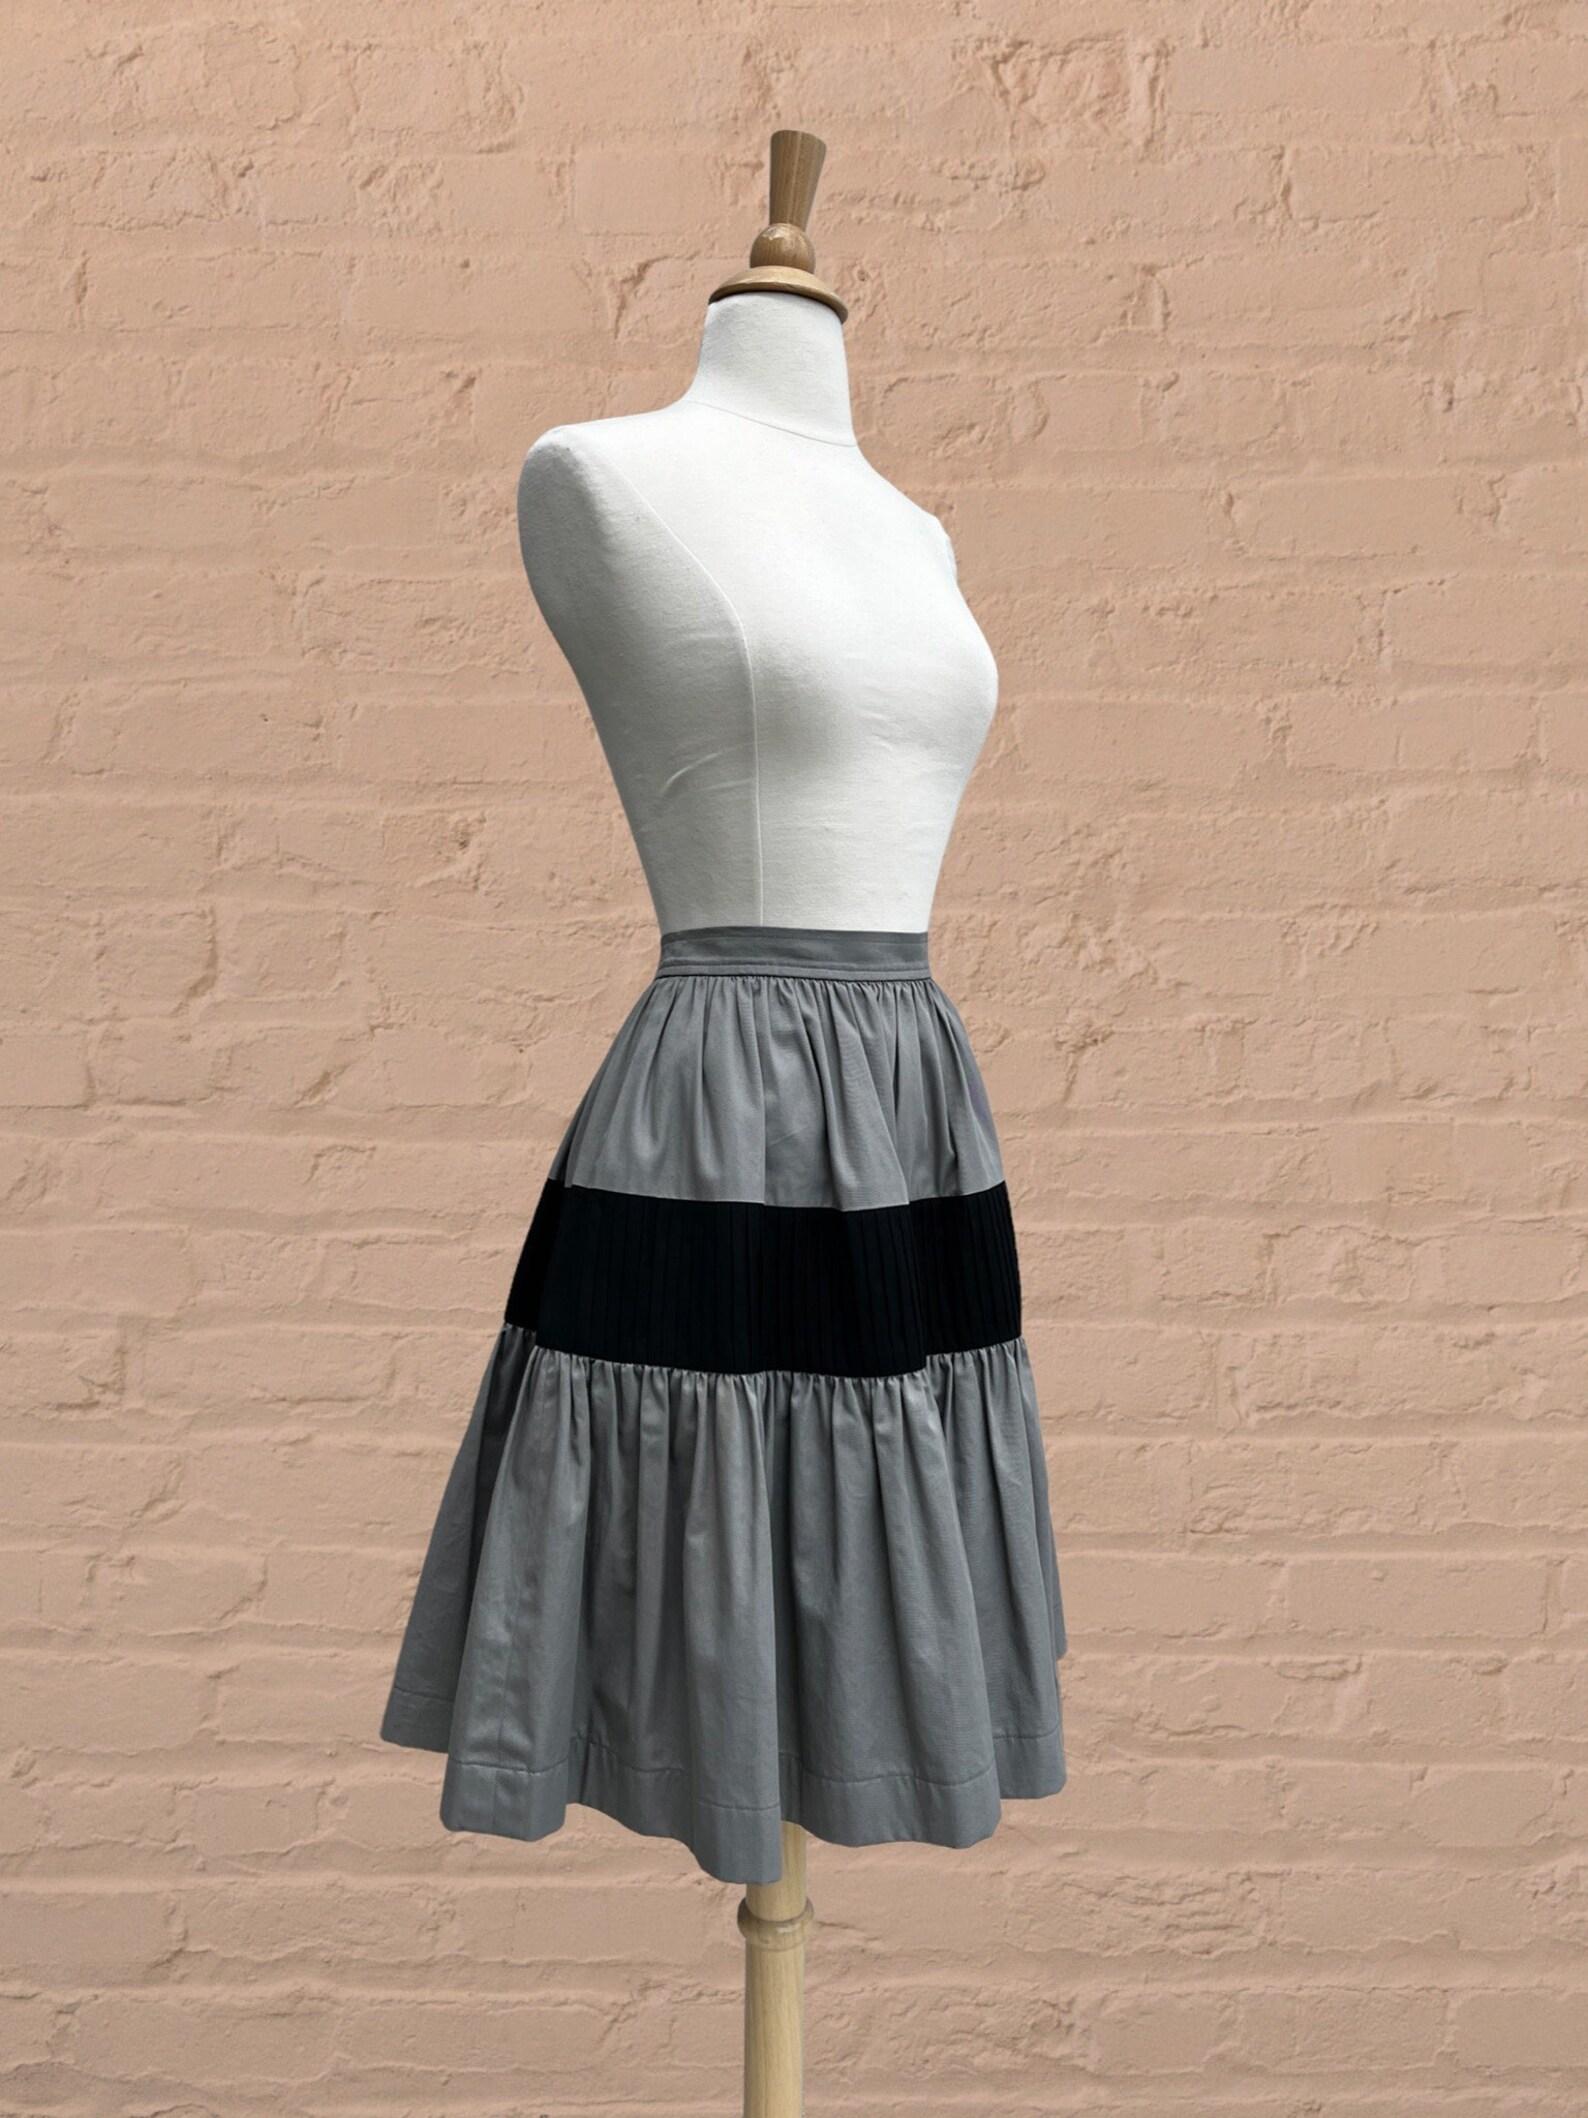 Yves Saint Laurent colorblock skirt In Excellent Condition For Sale In Brooklyn, NY